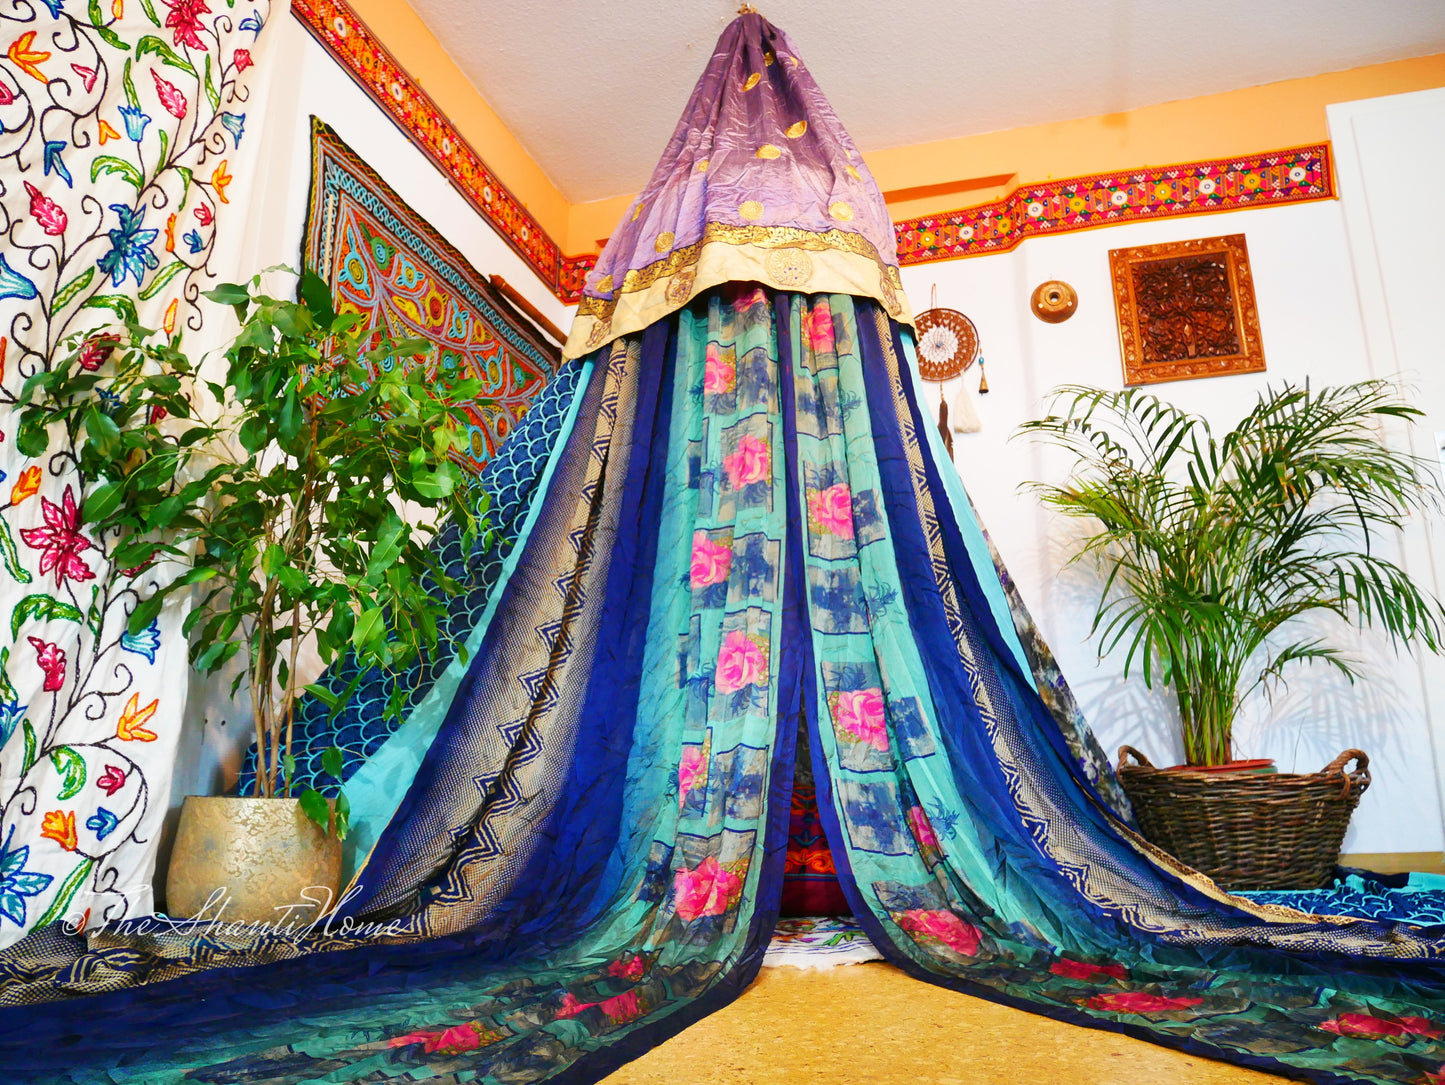 Boho canopy - Saree tent - bed canopy  | hippie decor - Shanti baldachin for Meditation Spaces or Reading nooks